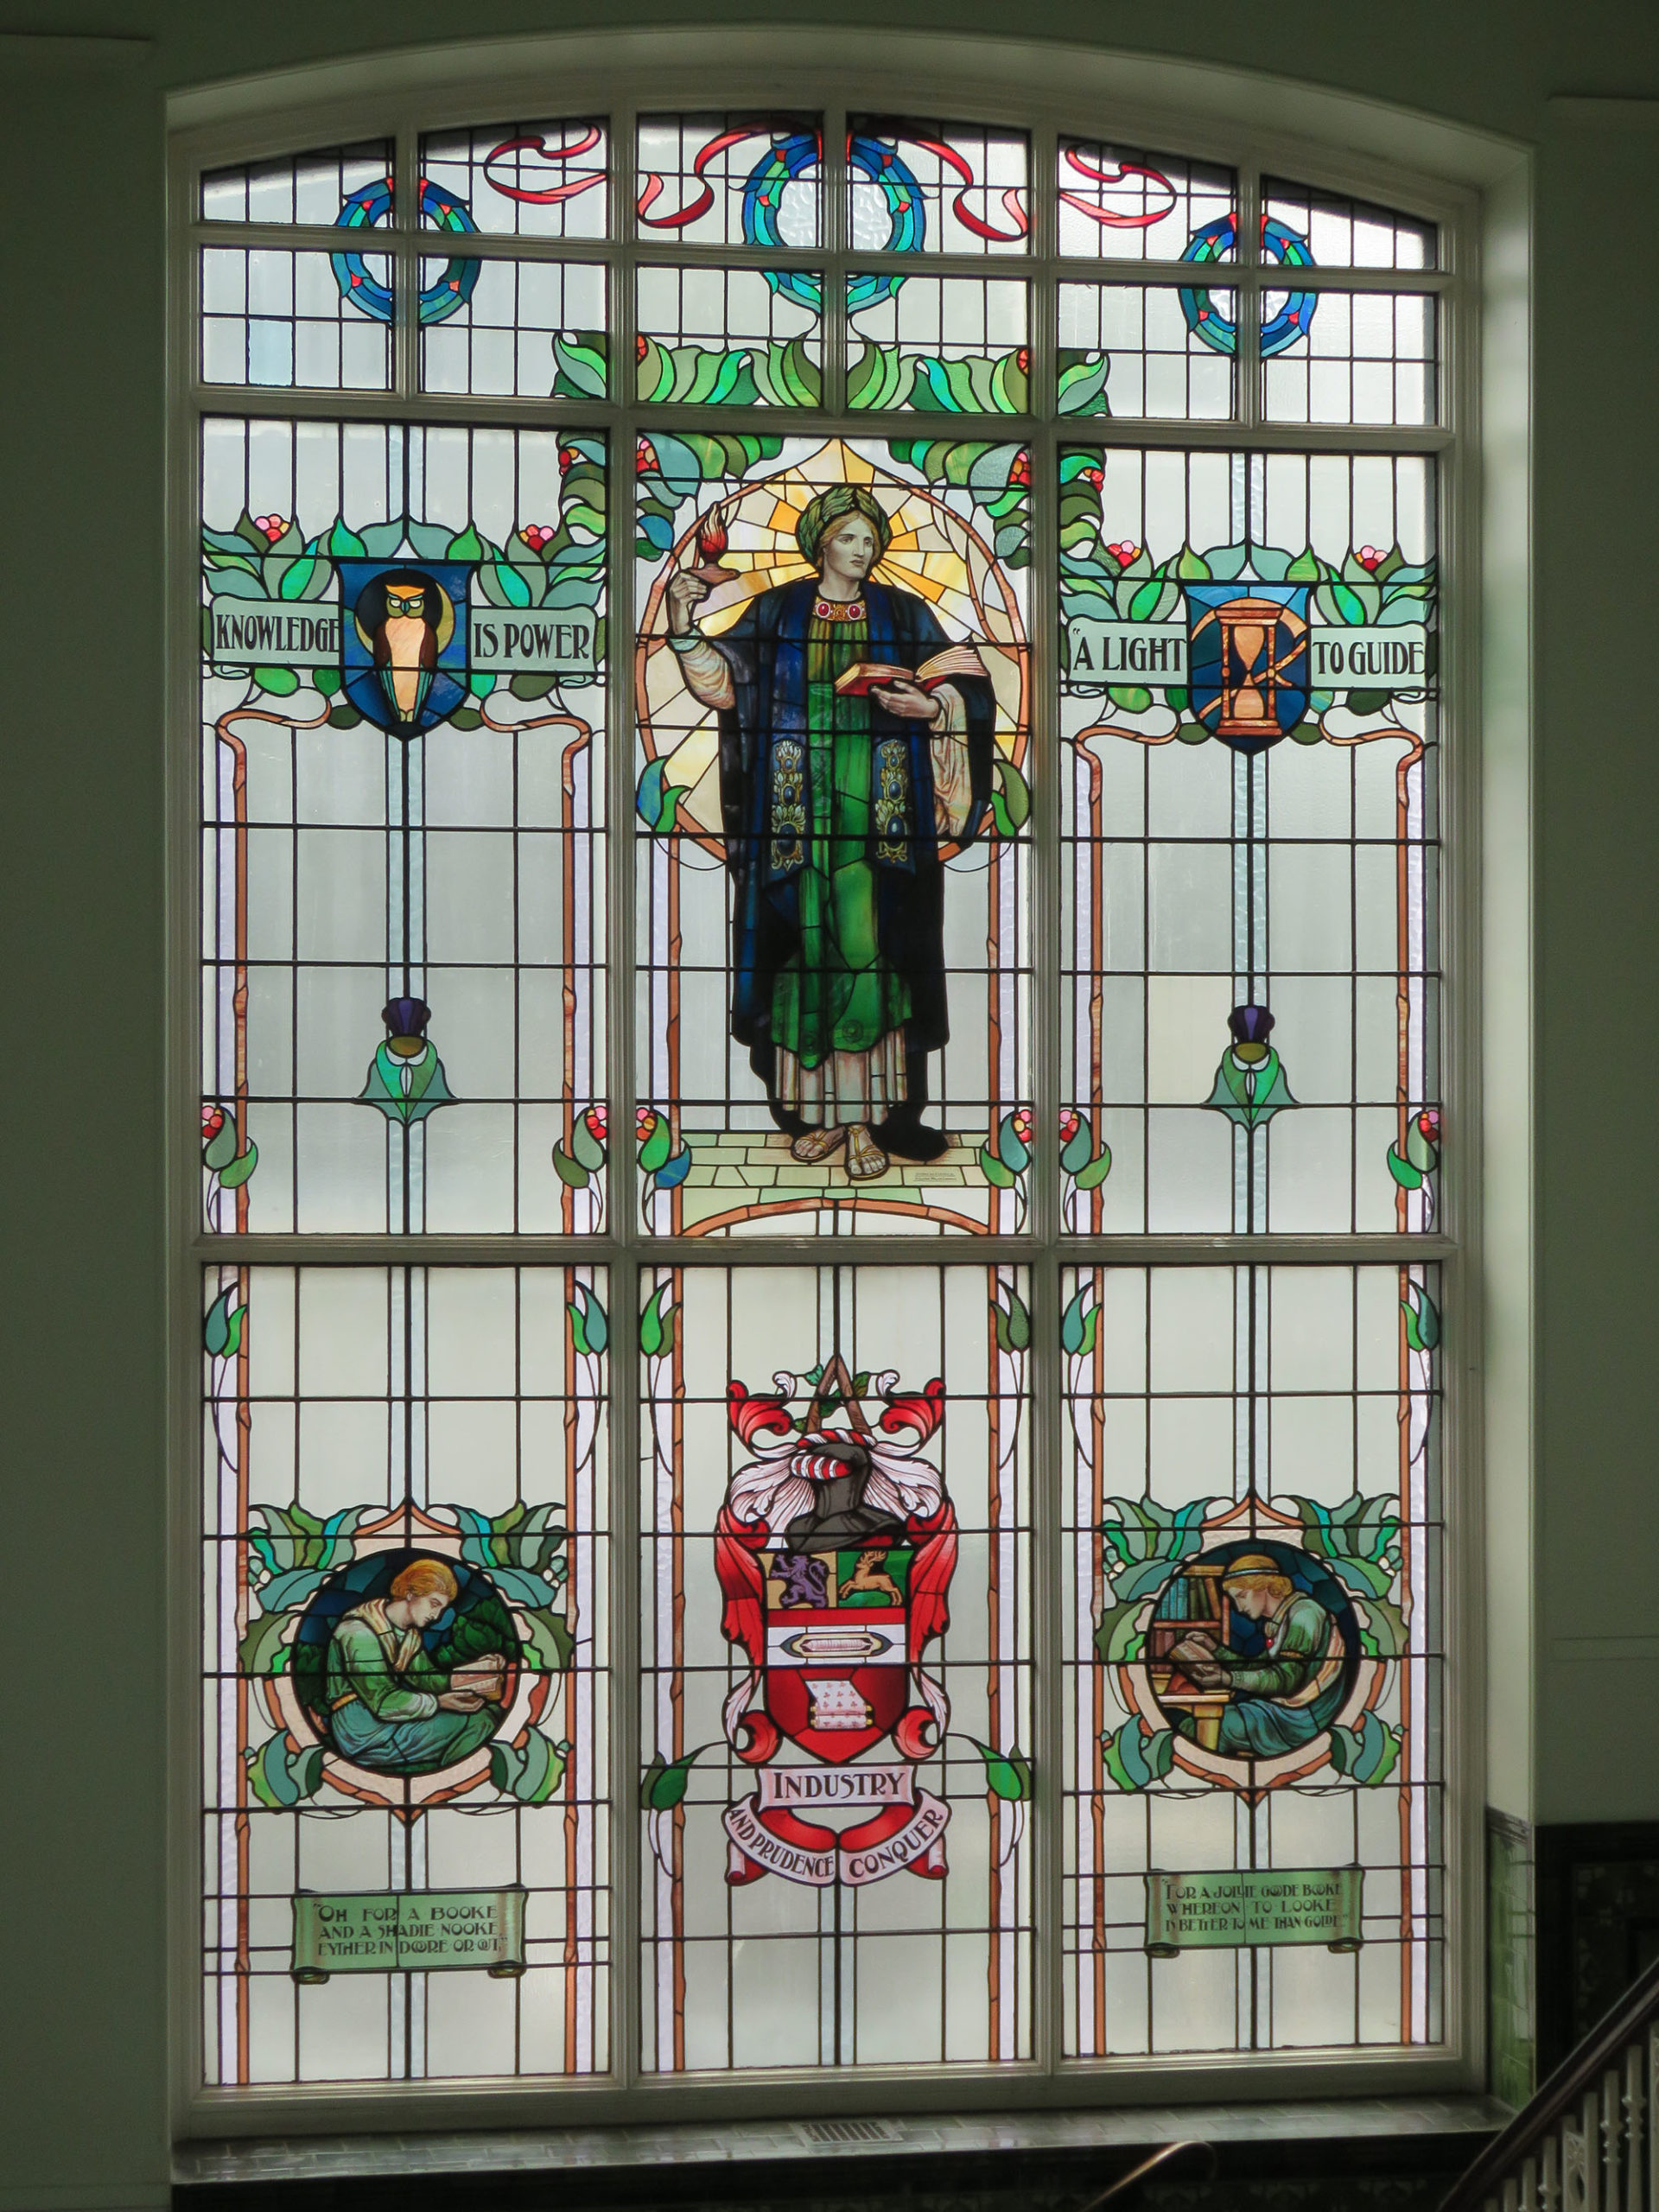 5.-ACCRINGTON-LIBRARY-WINDOW-DESIGNED-BY-HENRY-GUSTAVE-HILLER.-PHOTO-CREDIT-LANCASHIRE-COUNTY-LIBRARIES